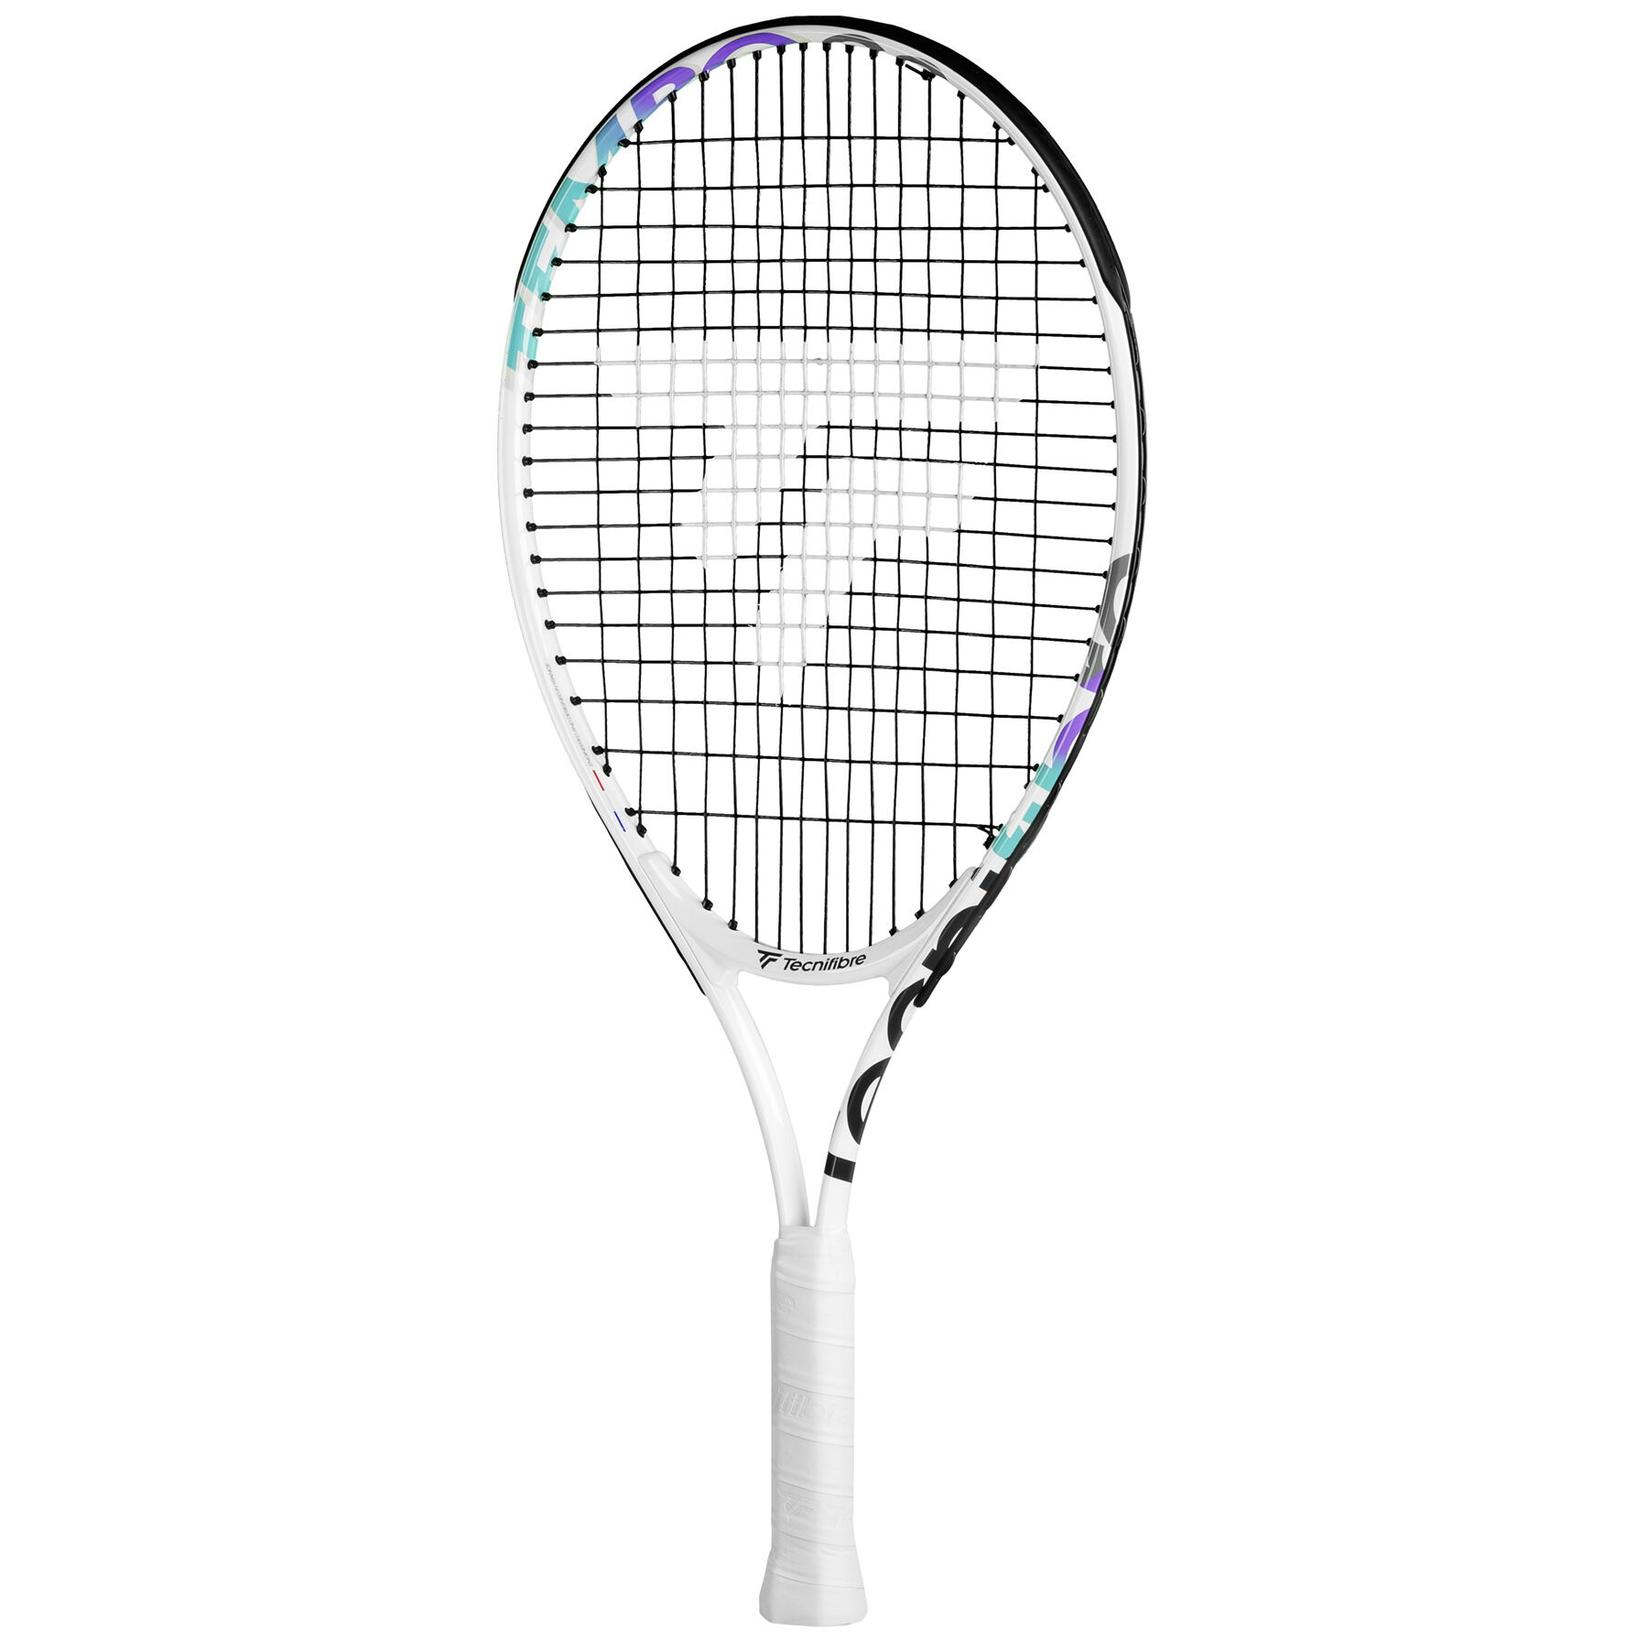 Selected image for TECNIFIBRE Reket Tempo 23